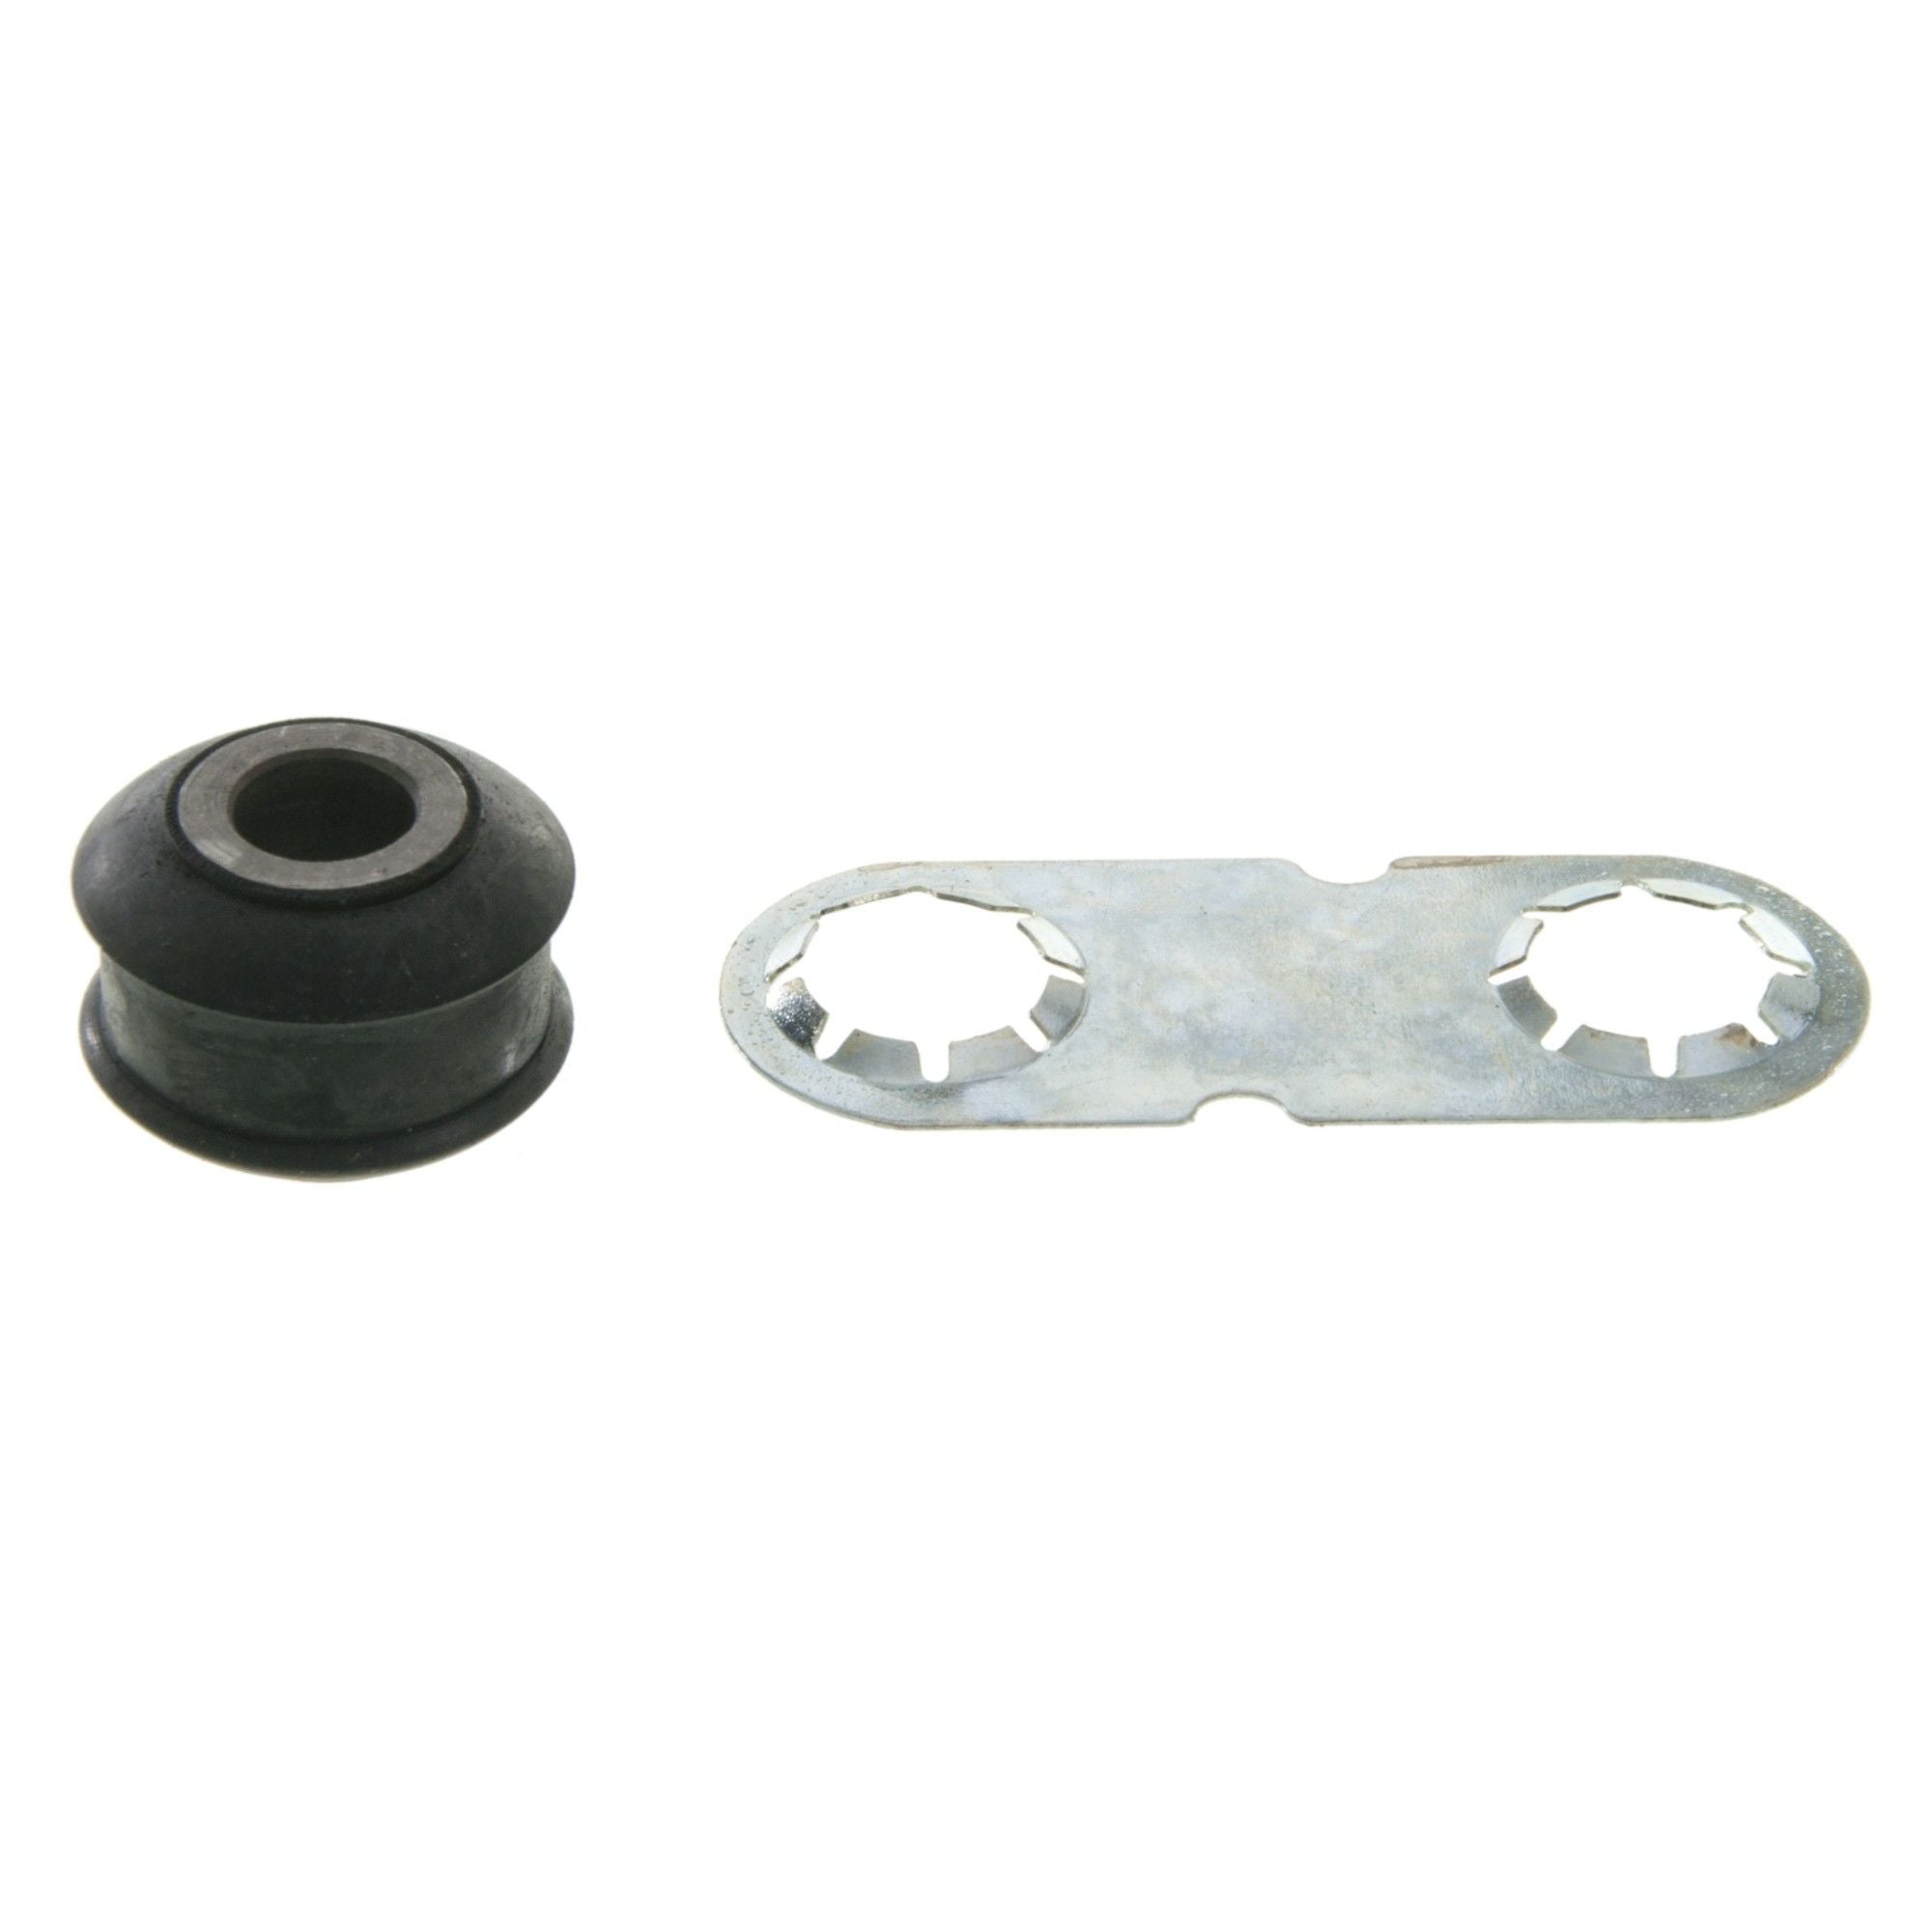 MOOG Chassis Products Steering Tie Rod End Bushing Kit EV119